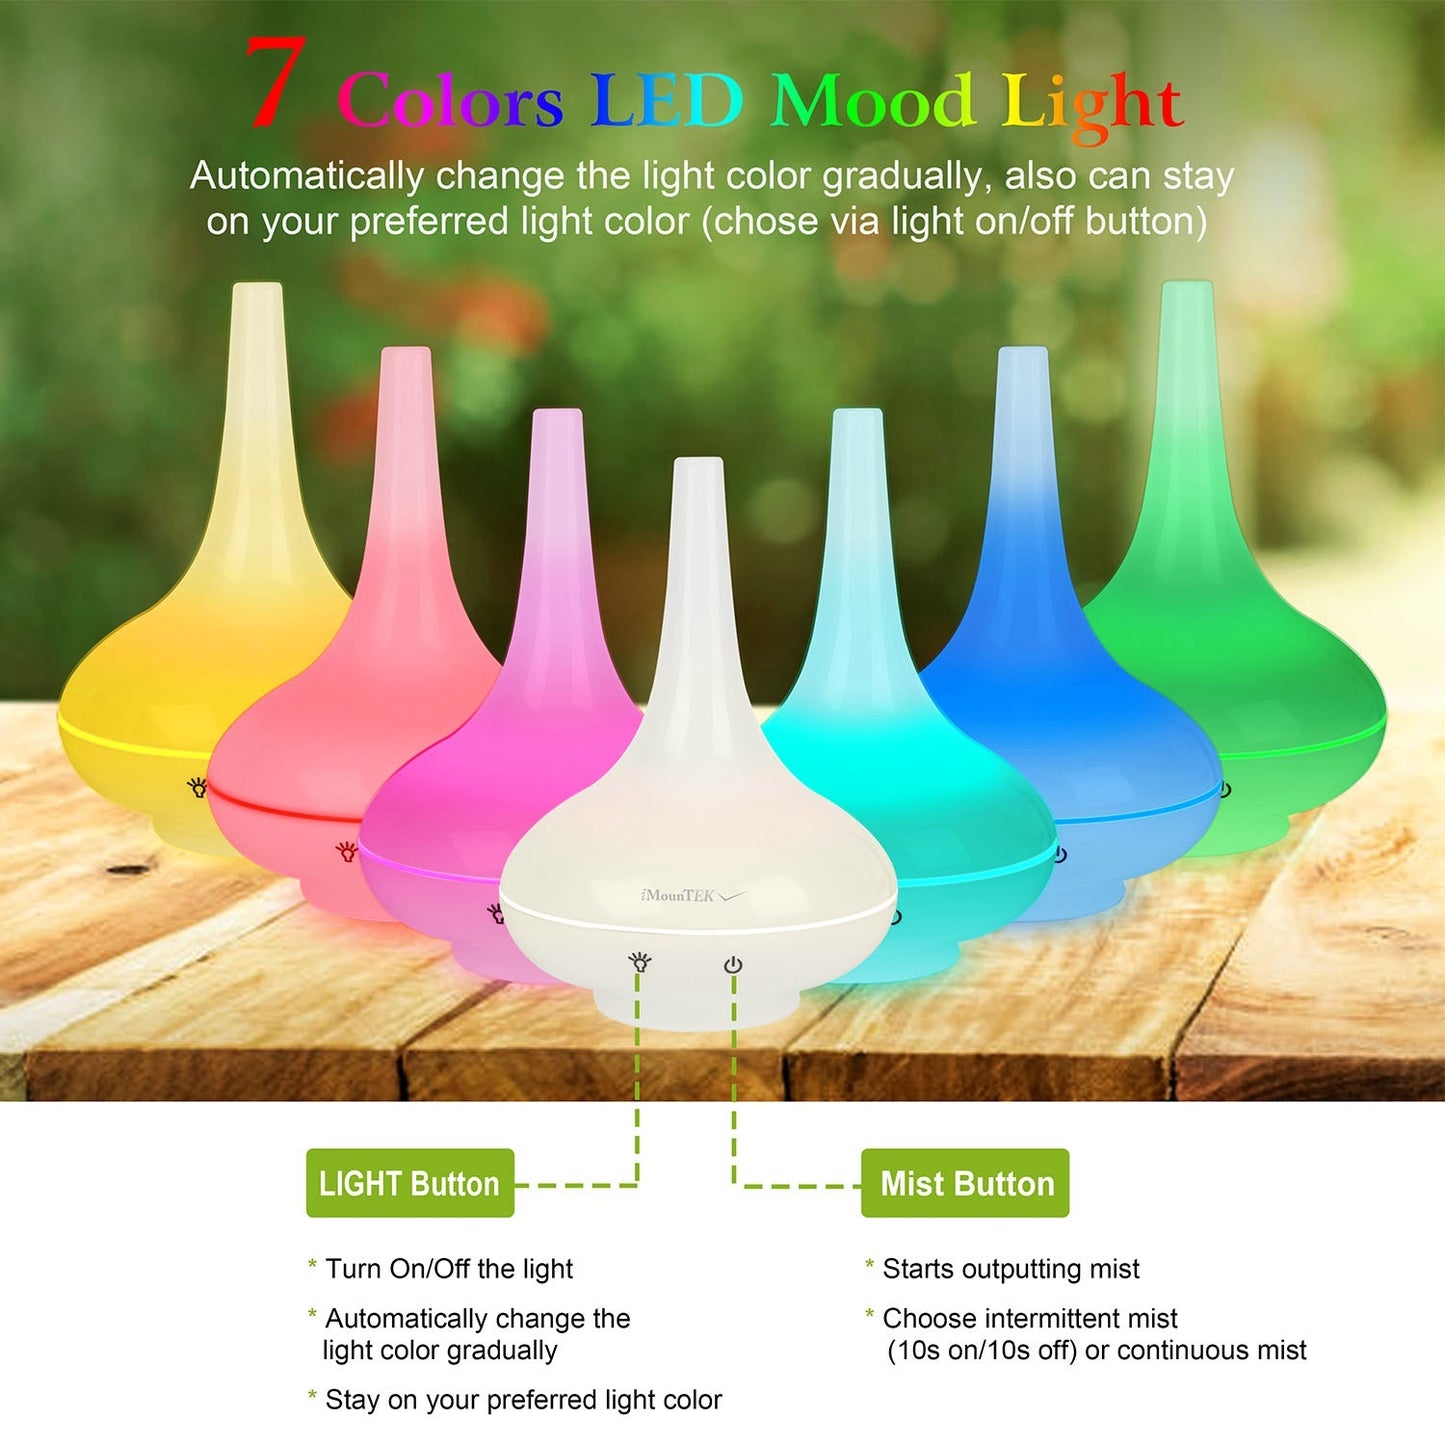 200ml Cool Mist Humidifier Ultrasonic Aroma Essential Oil Diffuser w/7 Color LED Lights Waterless Auto Off for Office Home Room Study Yoga Spa